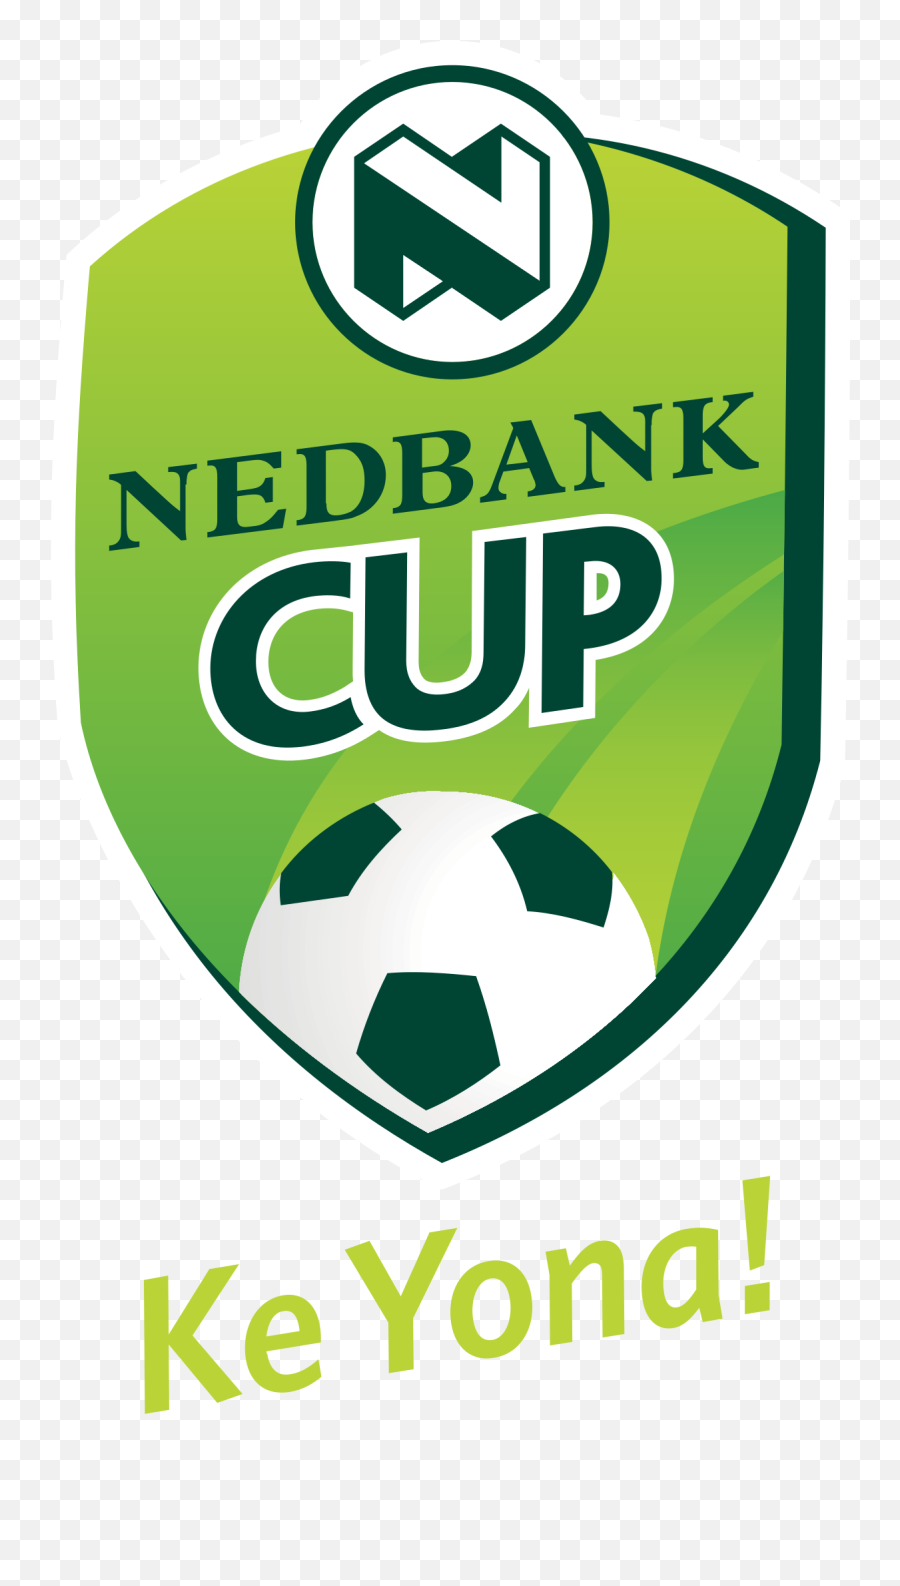 Super Bowl Trophy - South African Nedbank Cup Transparent Nedbank Cup Ke Yona Png,Super Bowl Trophy Png